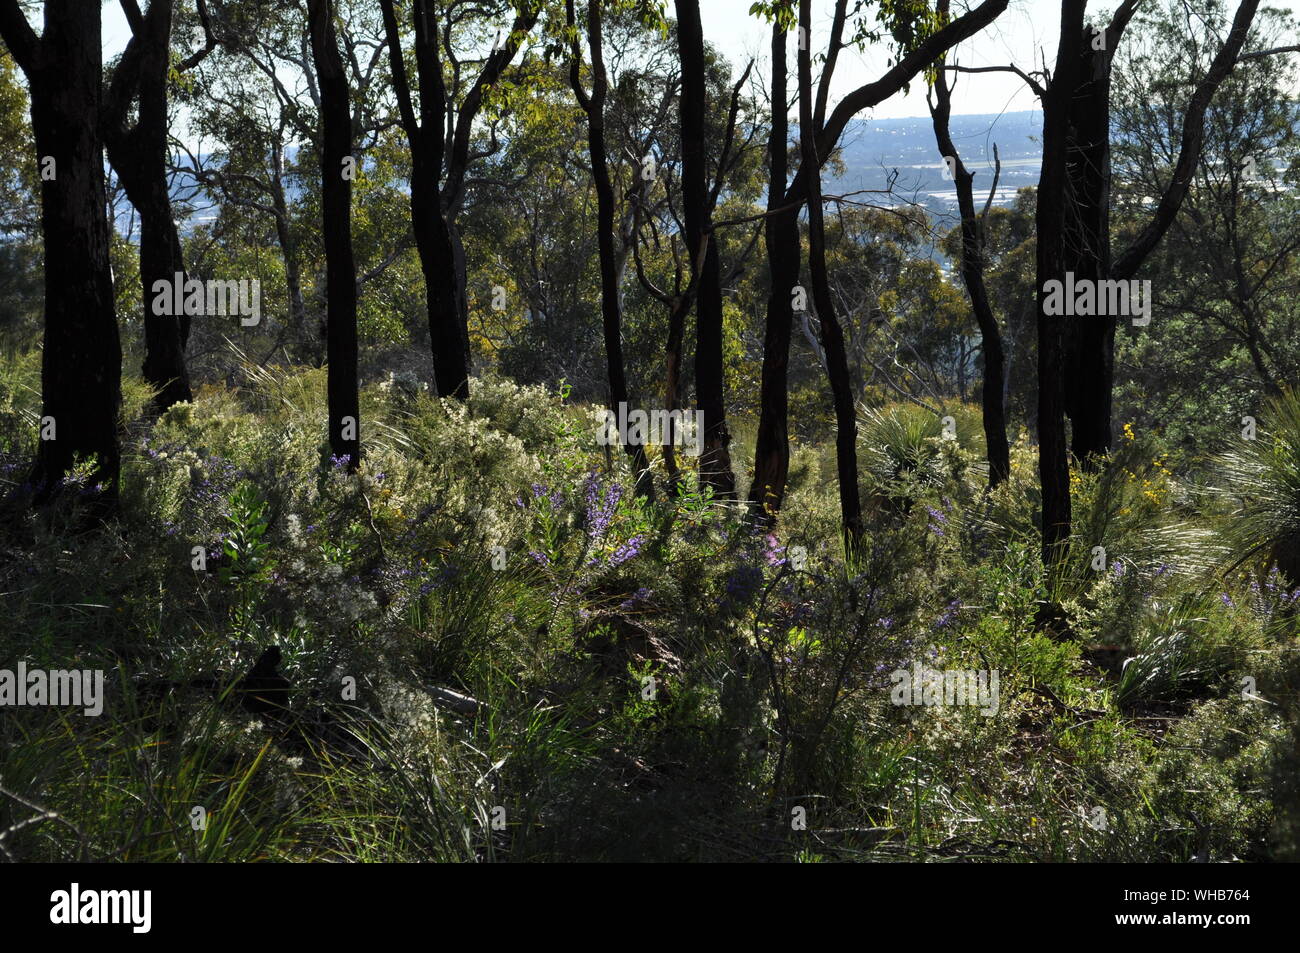 Eucalyptus forest after controlled burning for fire control, Whistlepipe Gully Walk, Mundy Regional Park, Perth Hills, Western Australia Stock Photo